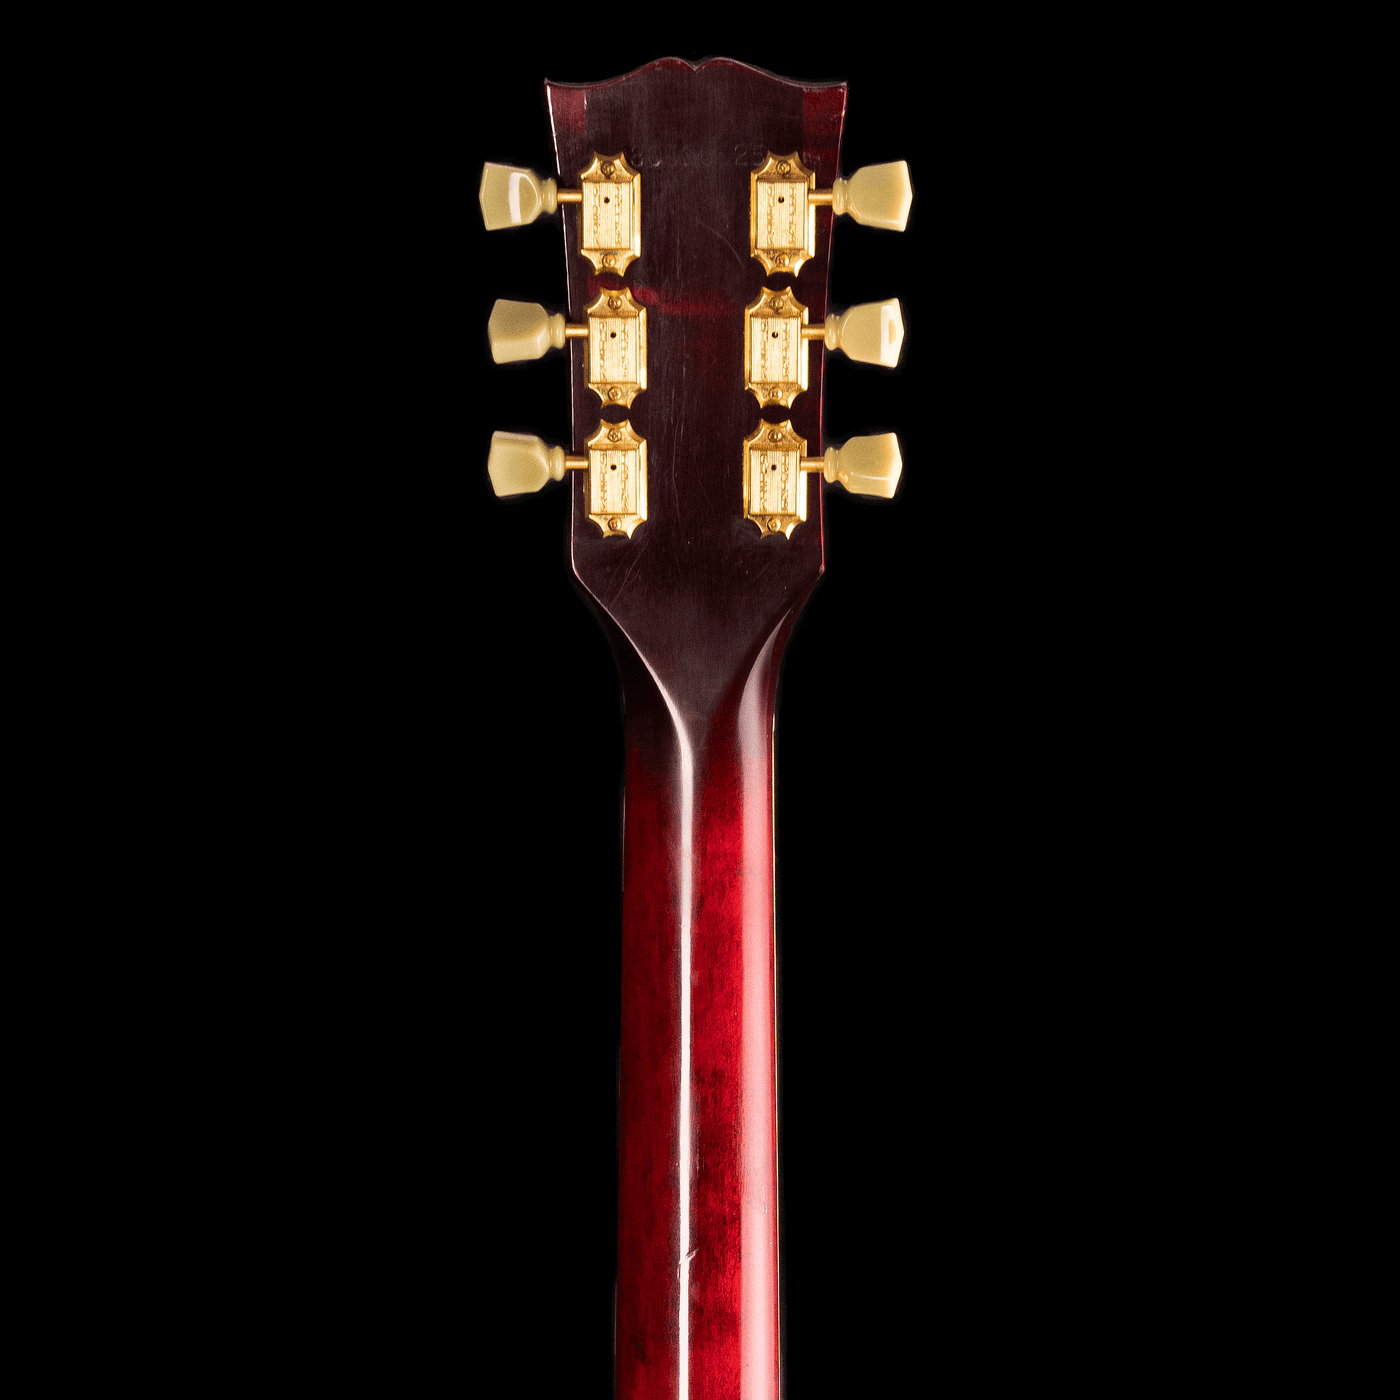 Gibson Les Paul Standard Wine Red '83 - $4599990 - Gearhub - The Fender Stratocaster is probably the most iconic guitar ever produced and the Fender Custom Shop '56 Stratocaster is a fitting addition to this legendary line.The Alder body is finished in a classic Fiesta Red nitro lacquer, period correct, this finish will wear beautifully with time and develop its own character even further. It also allows the natural resonance of the body to sing and sustain much more effectively compared with other finishes